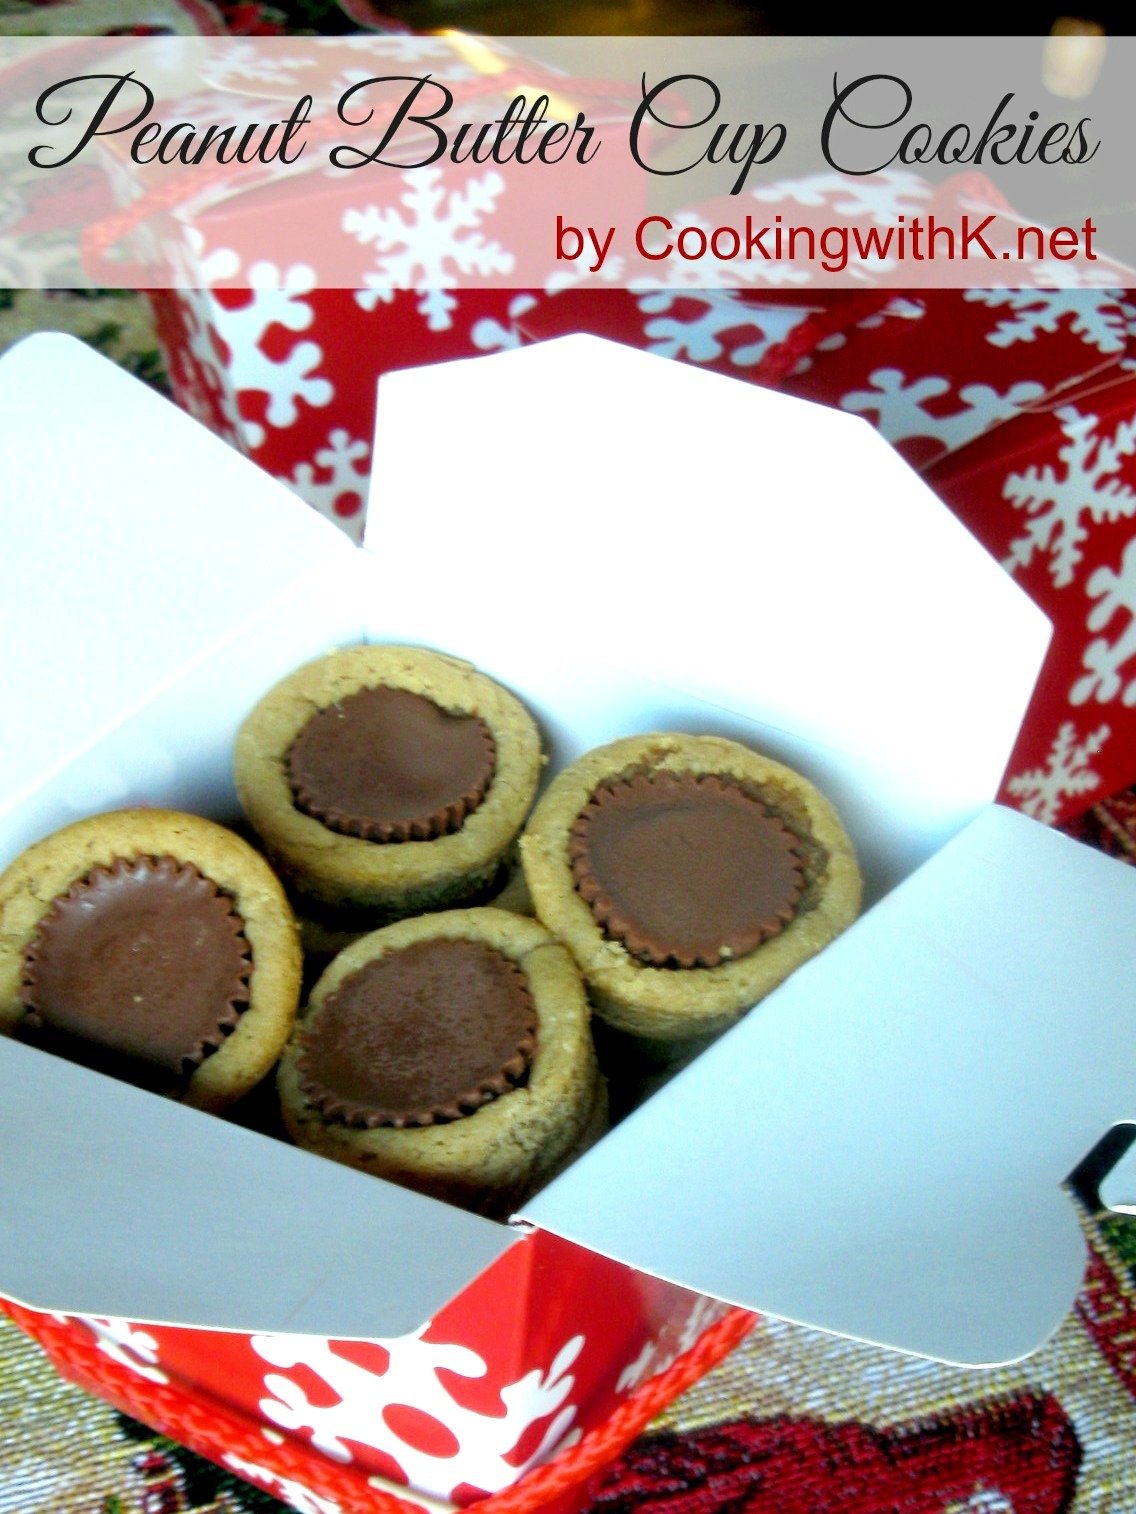 Cooking With K  Reese's Peanut Butter Cup Cookies Using Pillsbury